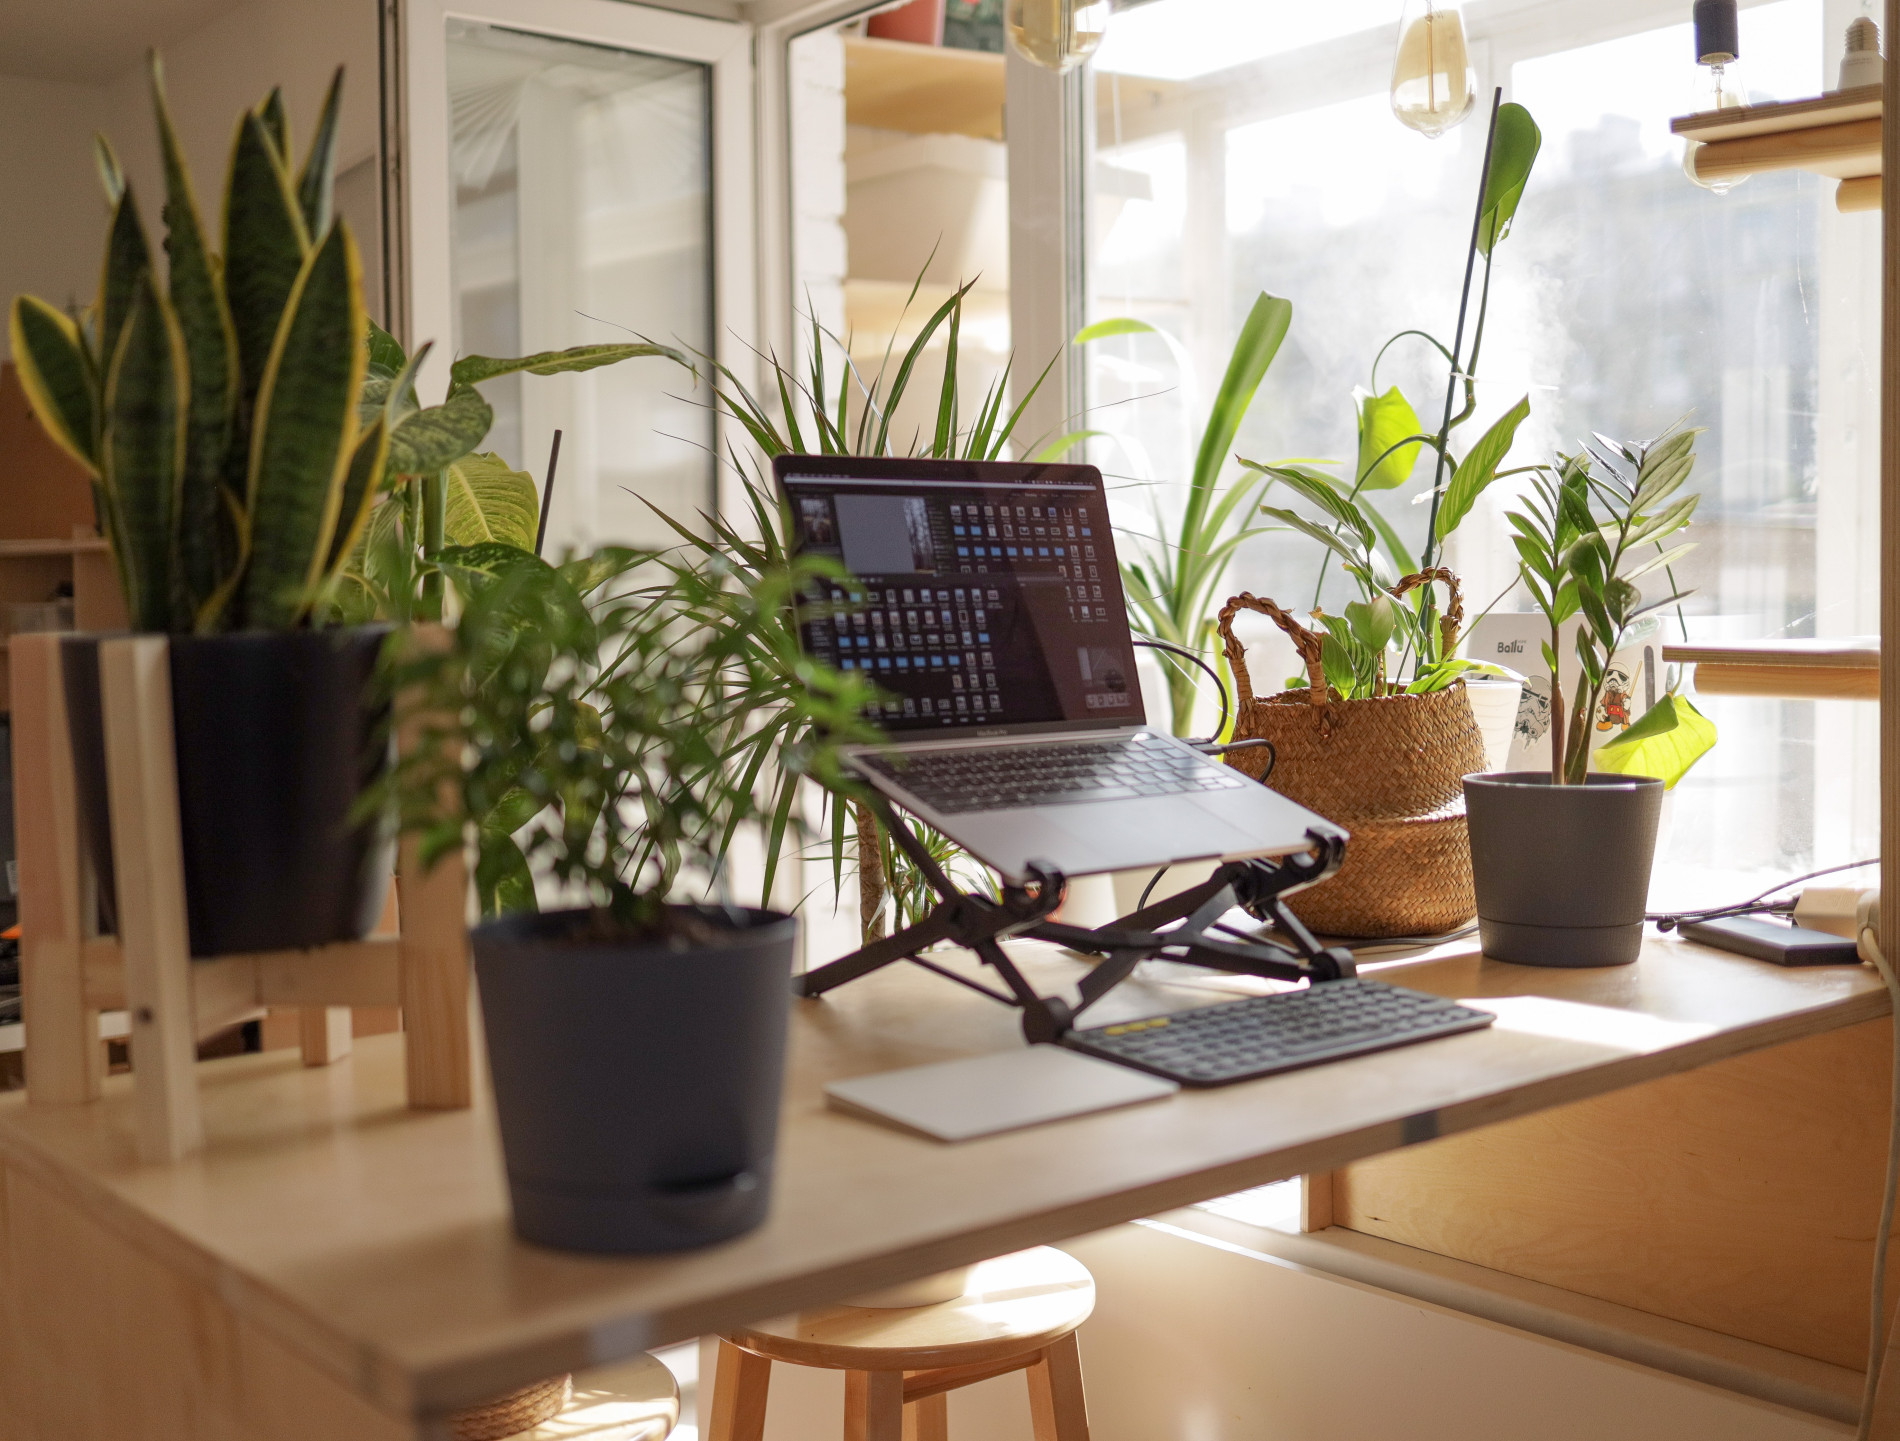 A laptop sitting in a stand on a wooden desk surrounded by lots of potted plants.